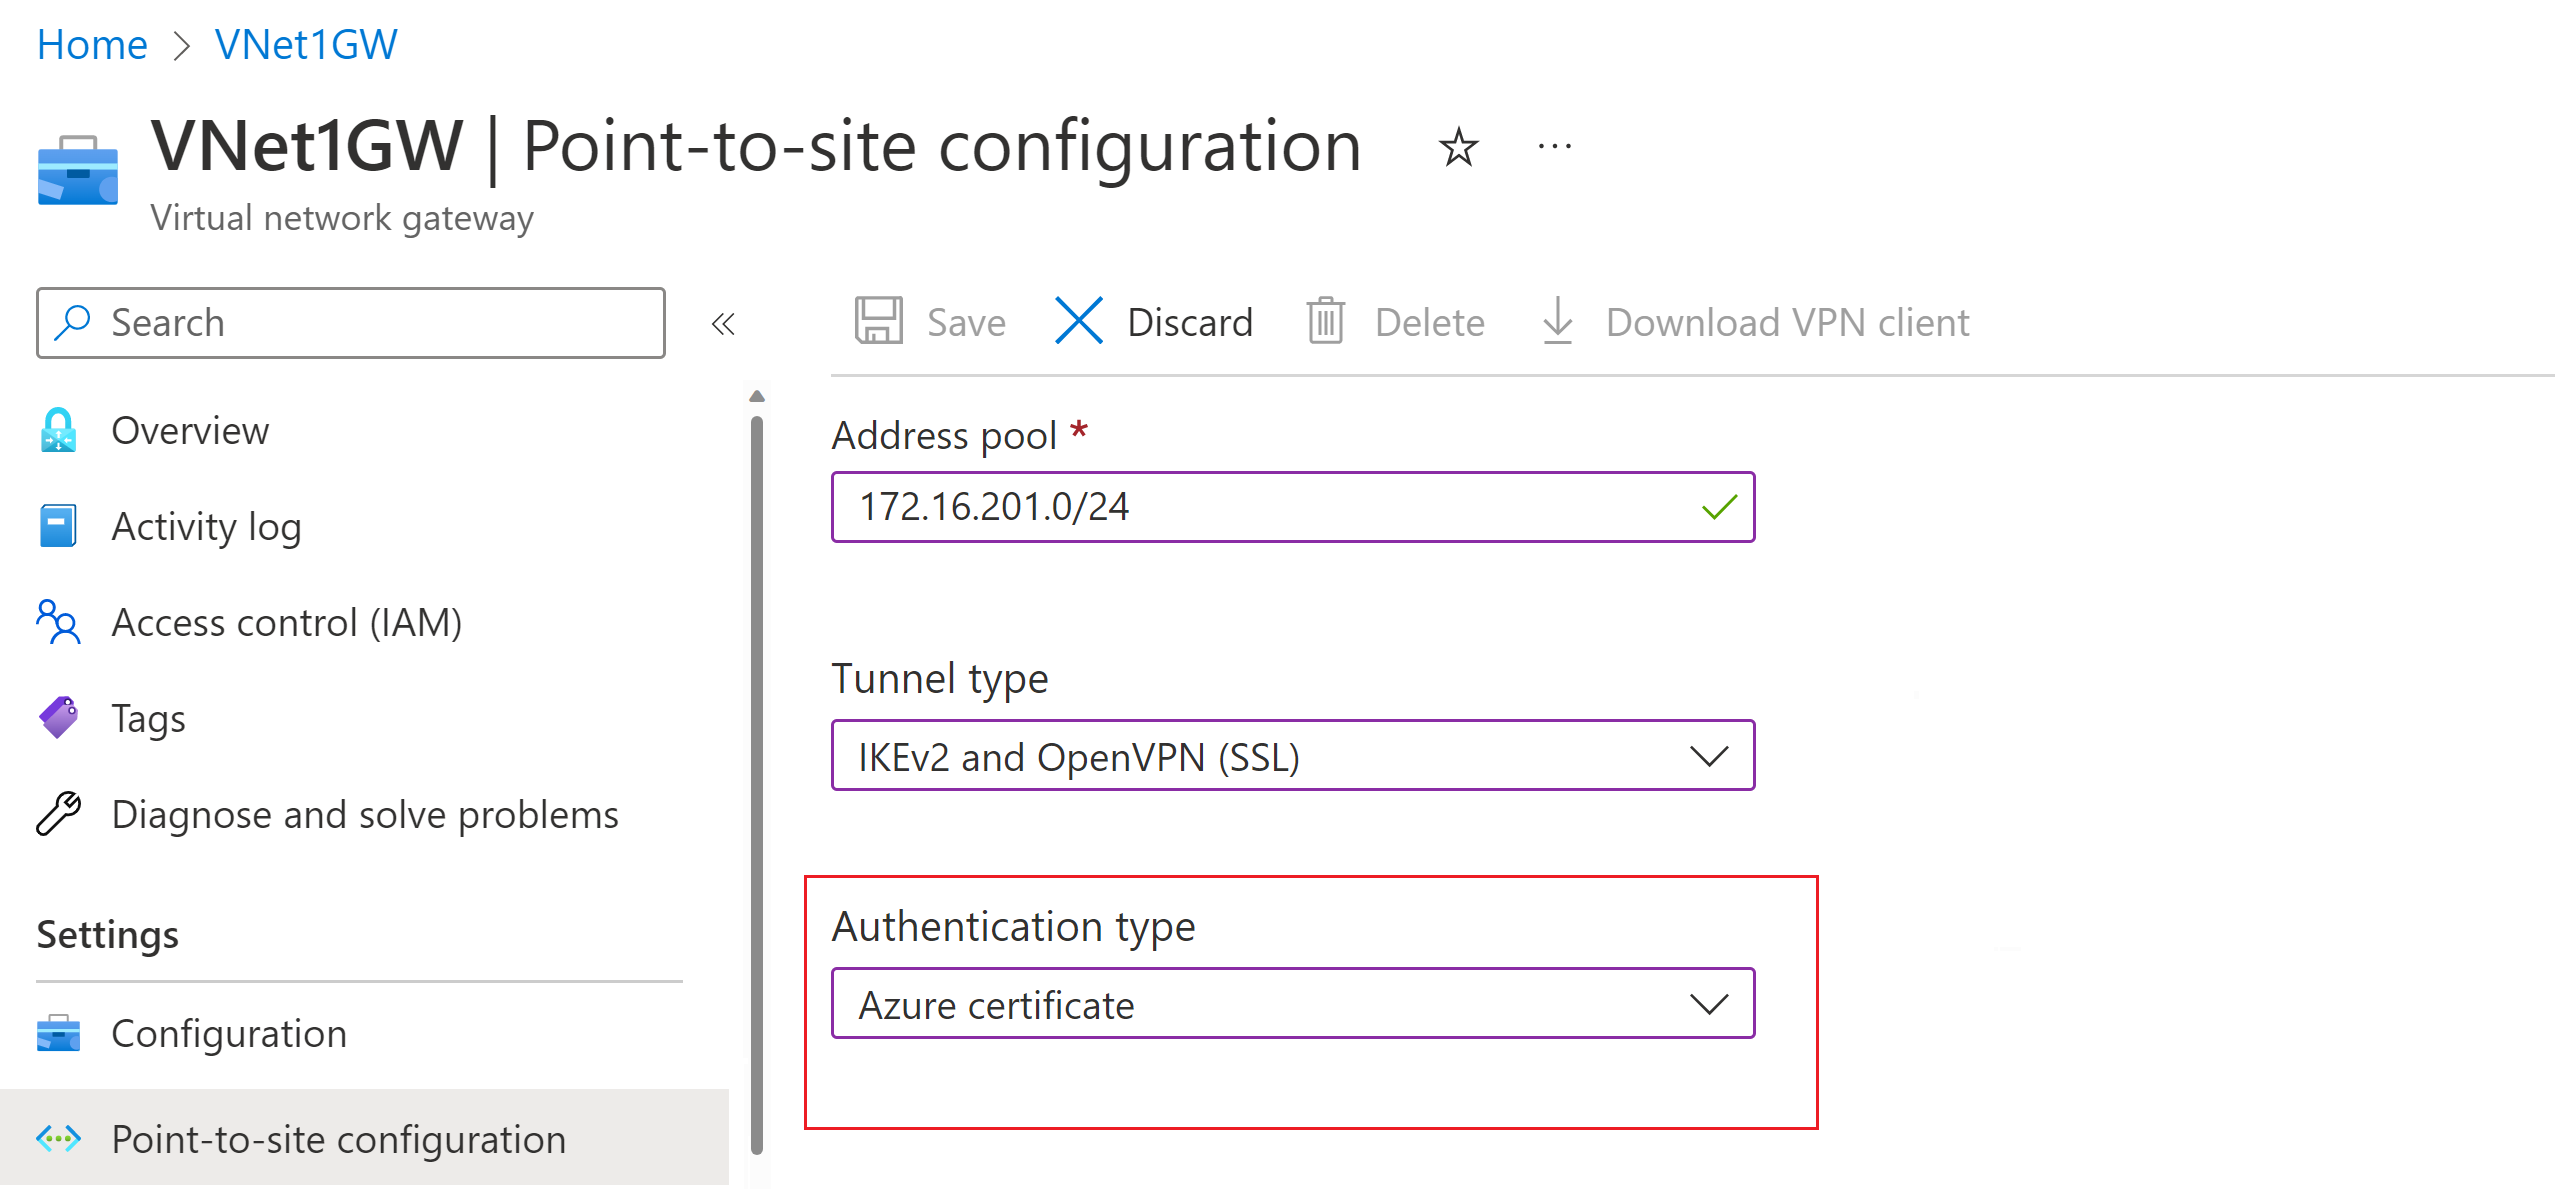 Screenshot of Point-to-site configuration page - authentication type.